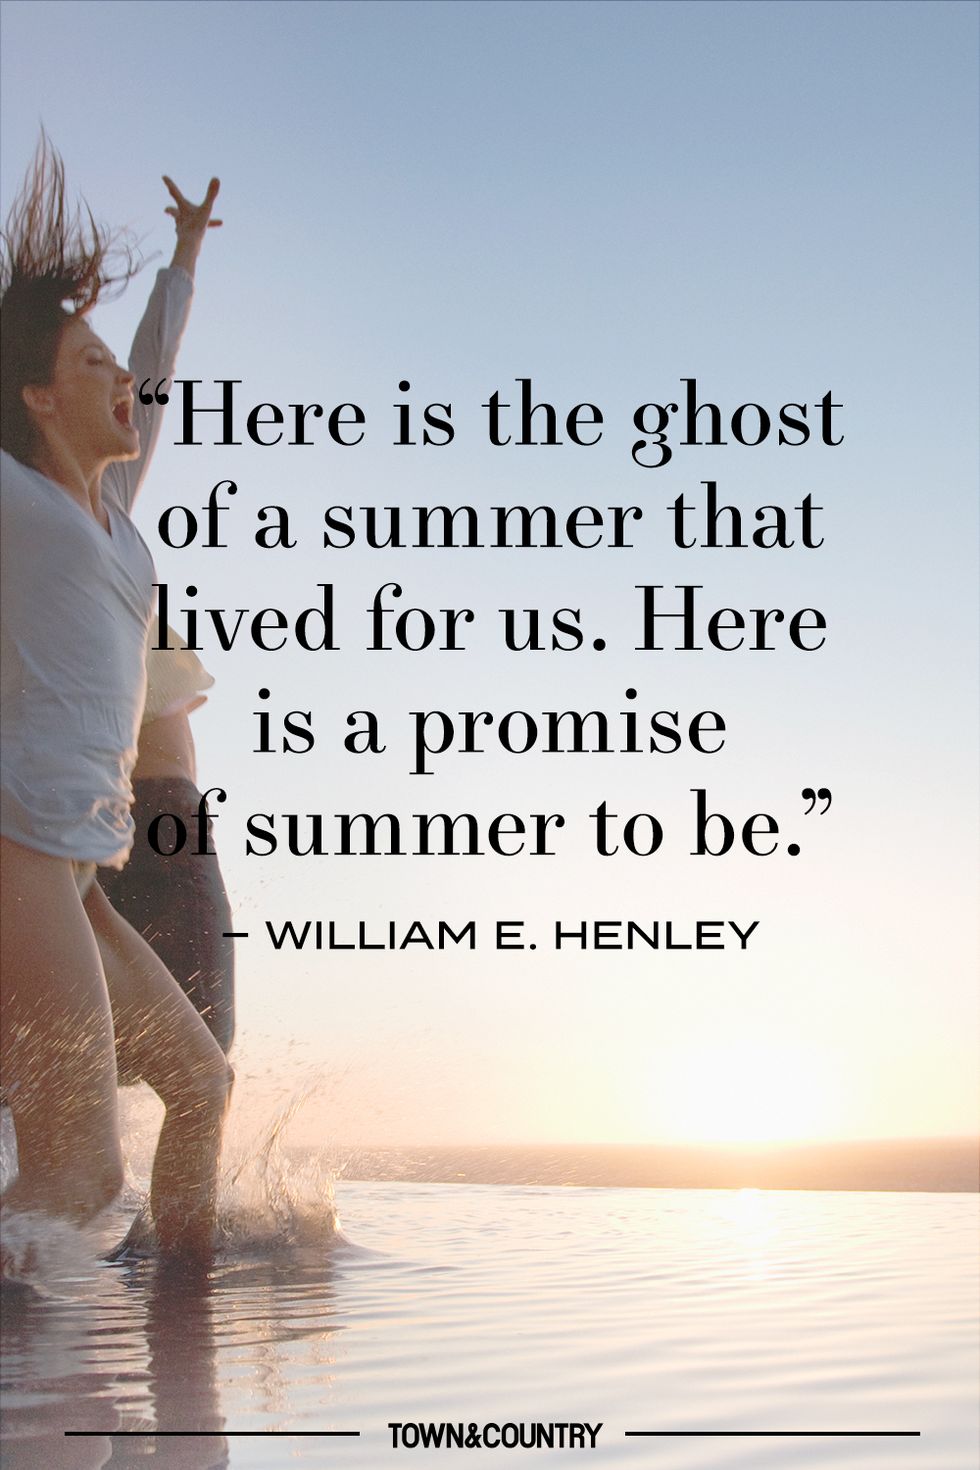 30+ Best End of Summer Quotes - Beautiful Quotes About the Last